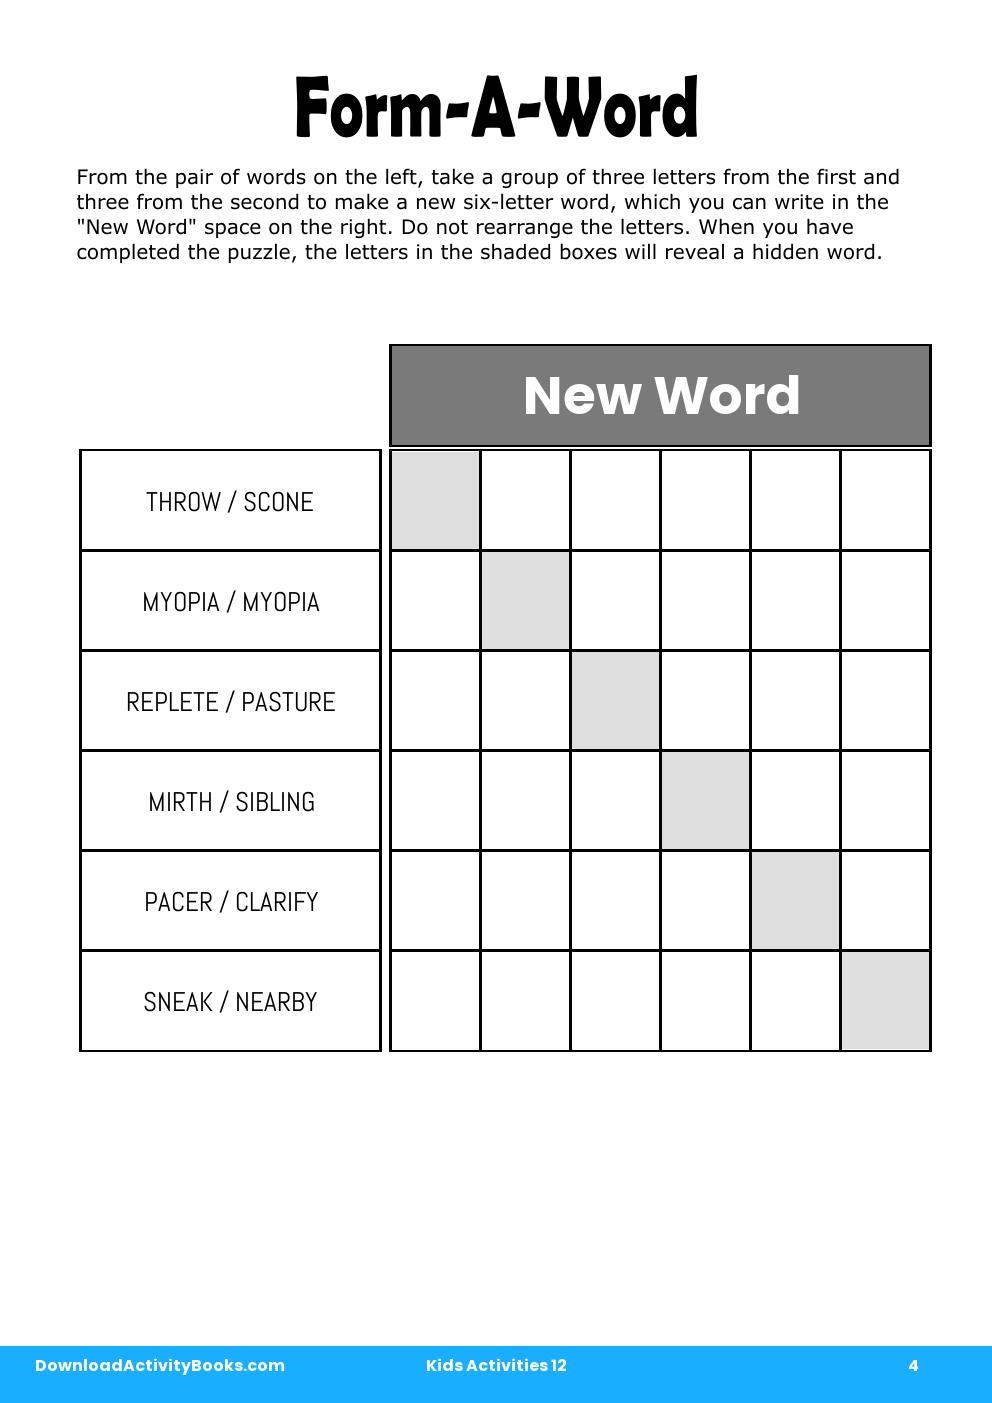 Form-A-Word in Kids Activities 12